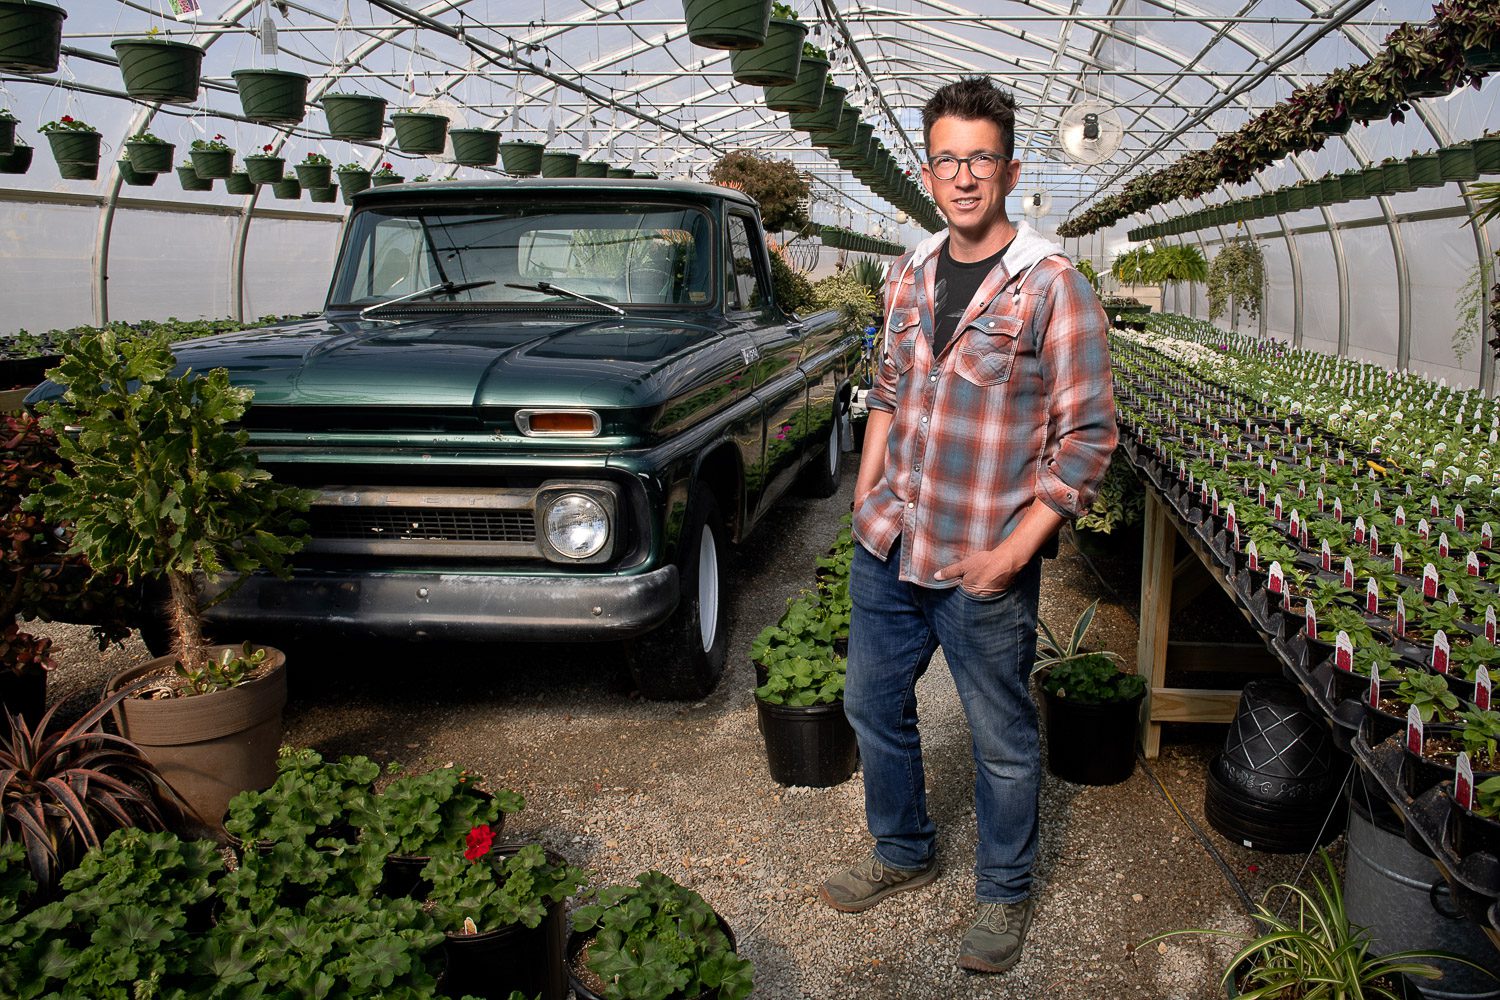 Greenhouse owner stands by old green truck in Callaway Fields Greenhouse